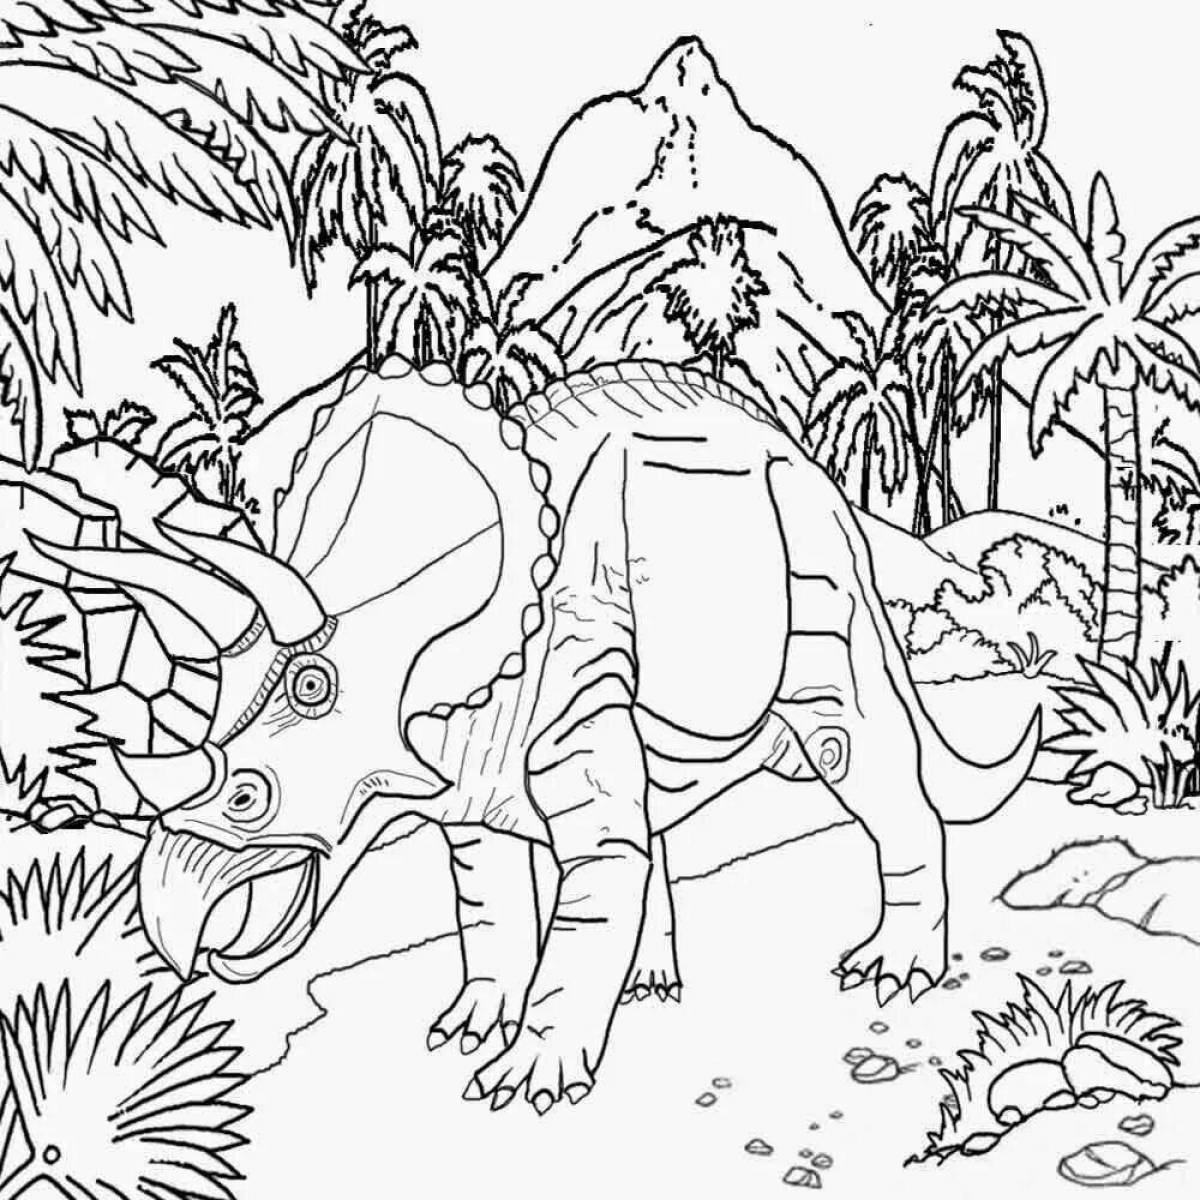 Lego dinosaur coloring page live